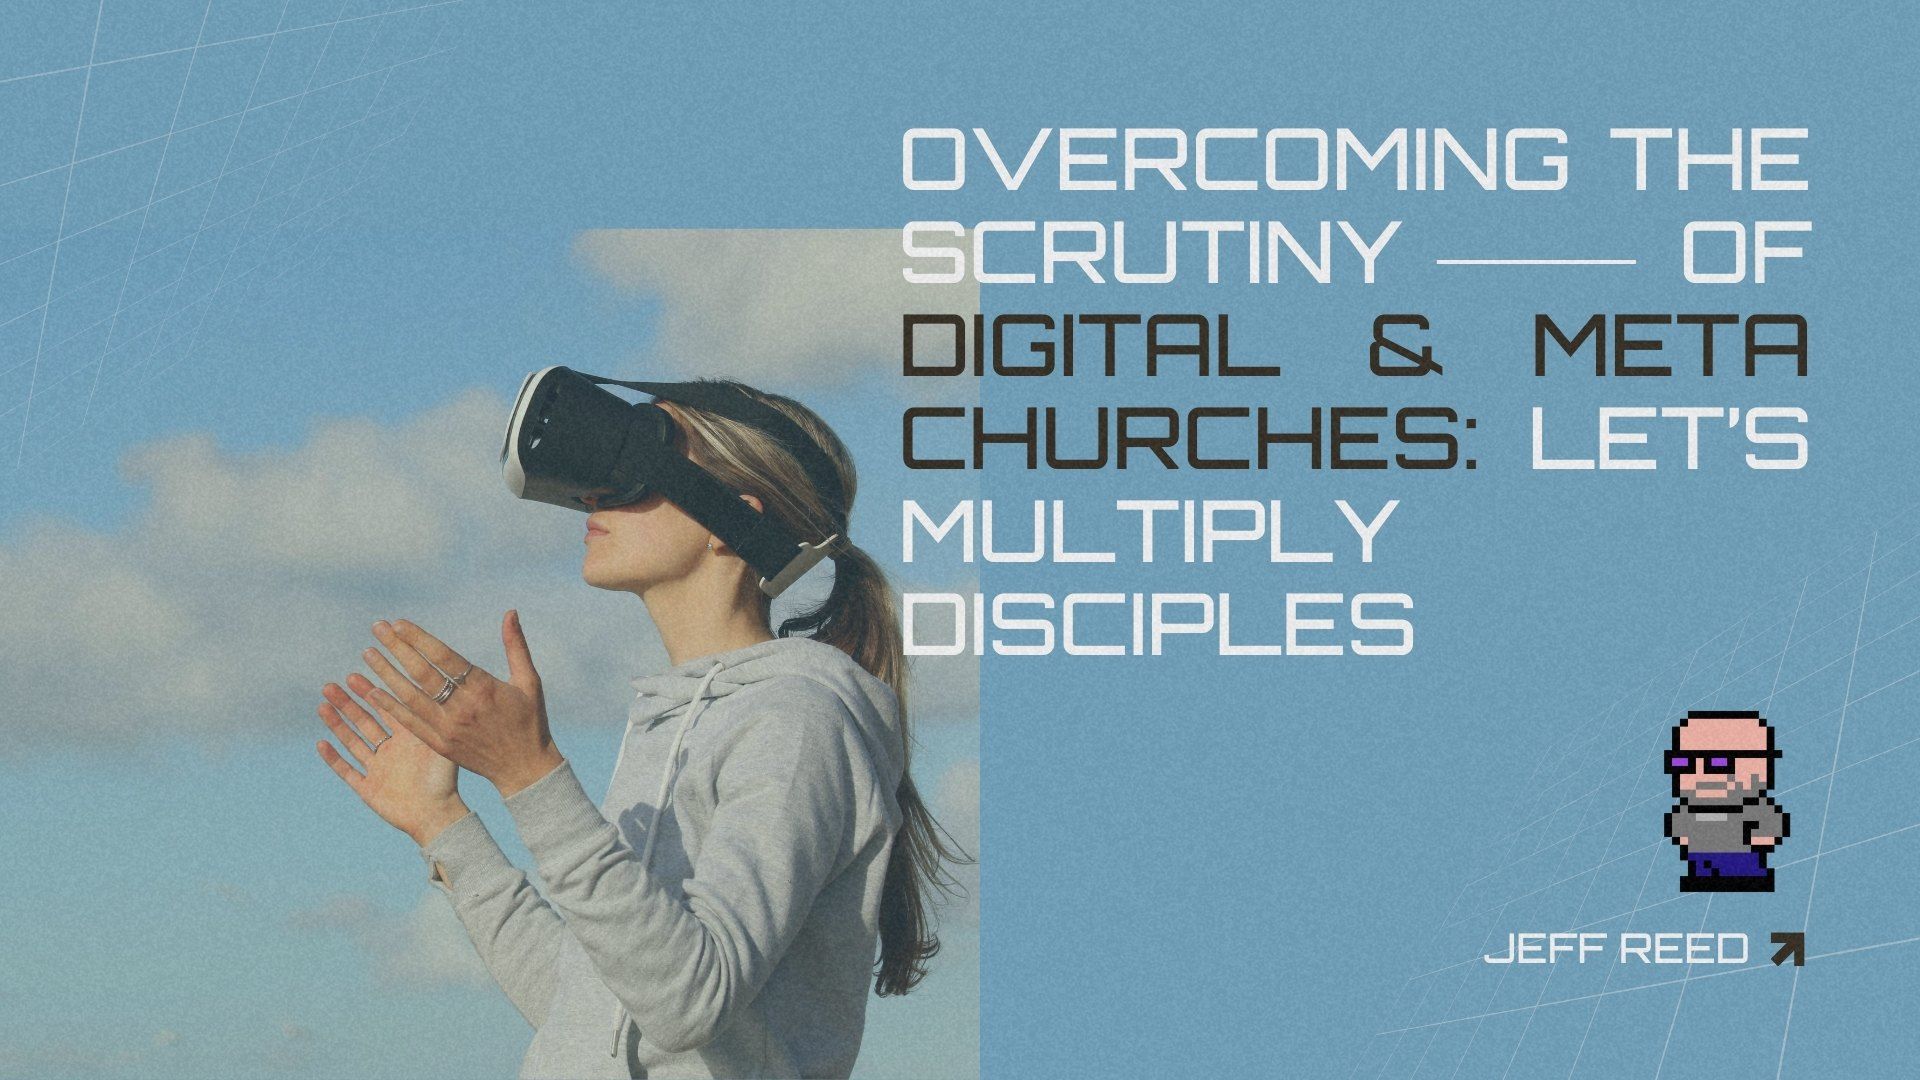 Overcoming the Scrutiny of Digital/Meta Churches: Let's Multiply Disciples